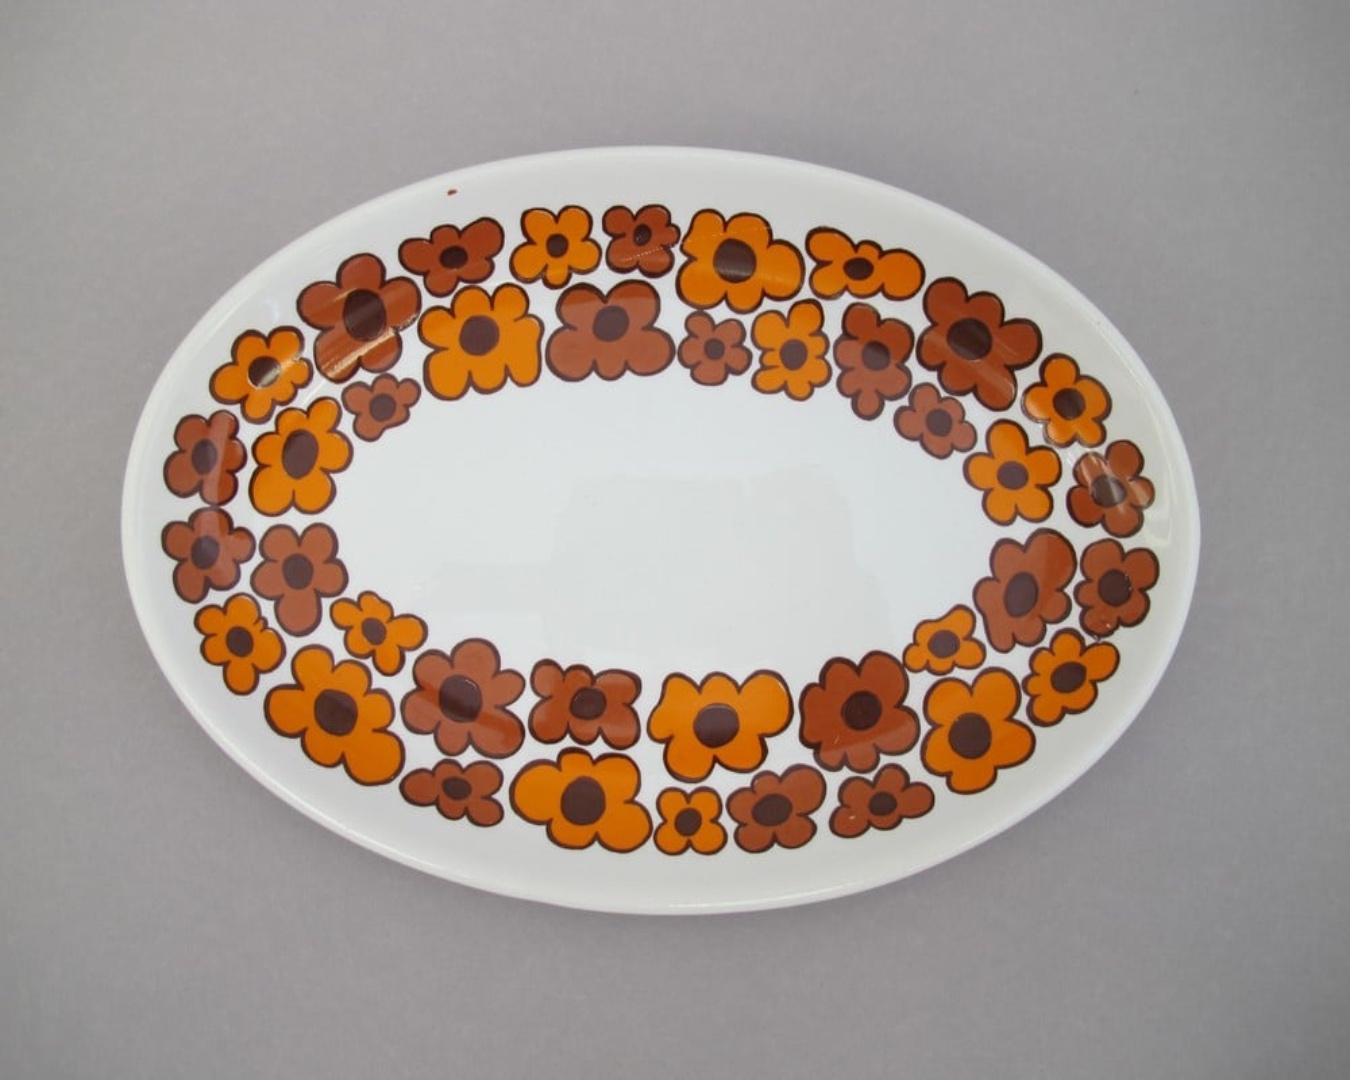 A ceramic plate decorated with joyful orange and dusky red flowers. 